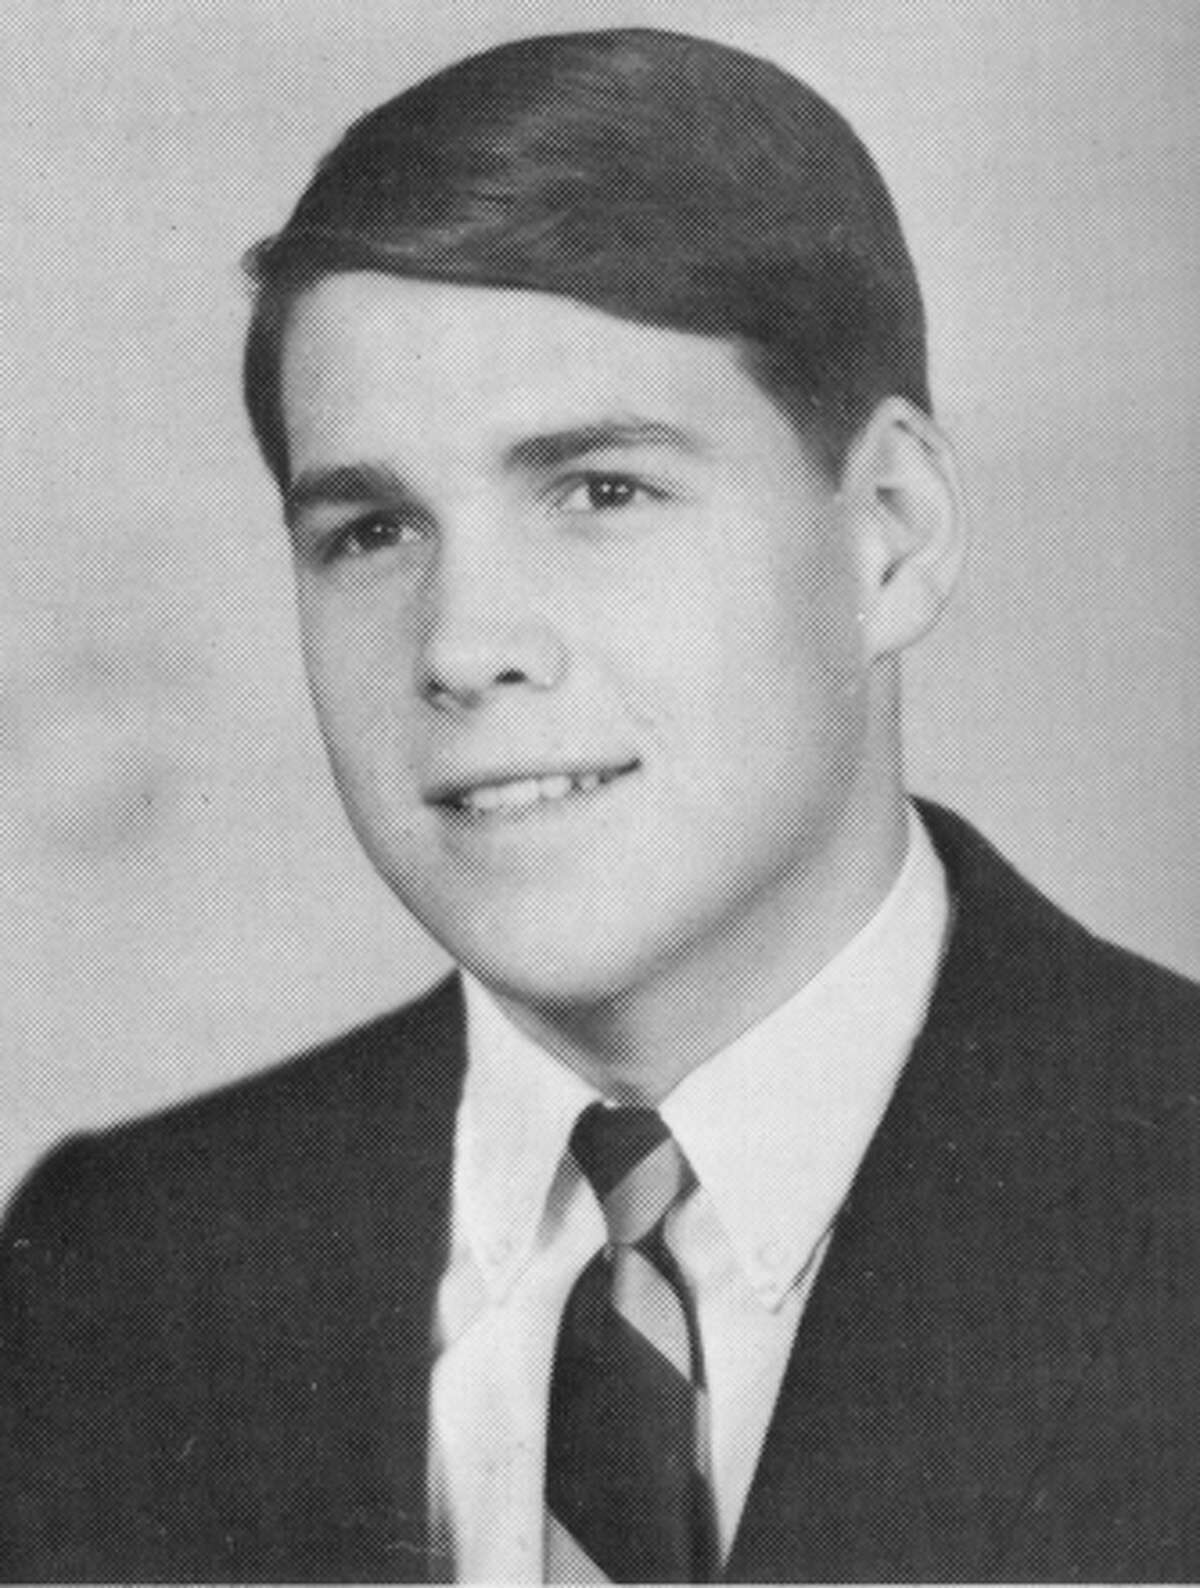 Rick Perry's senior class photo from his 1968 high school yearbook.